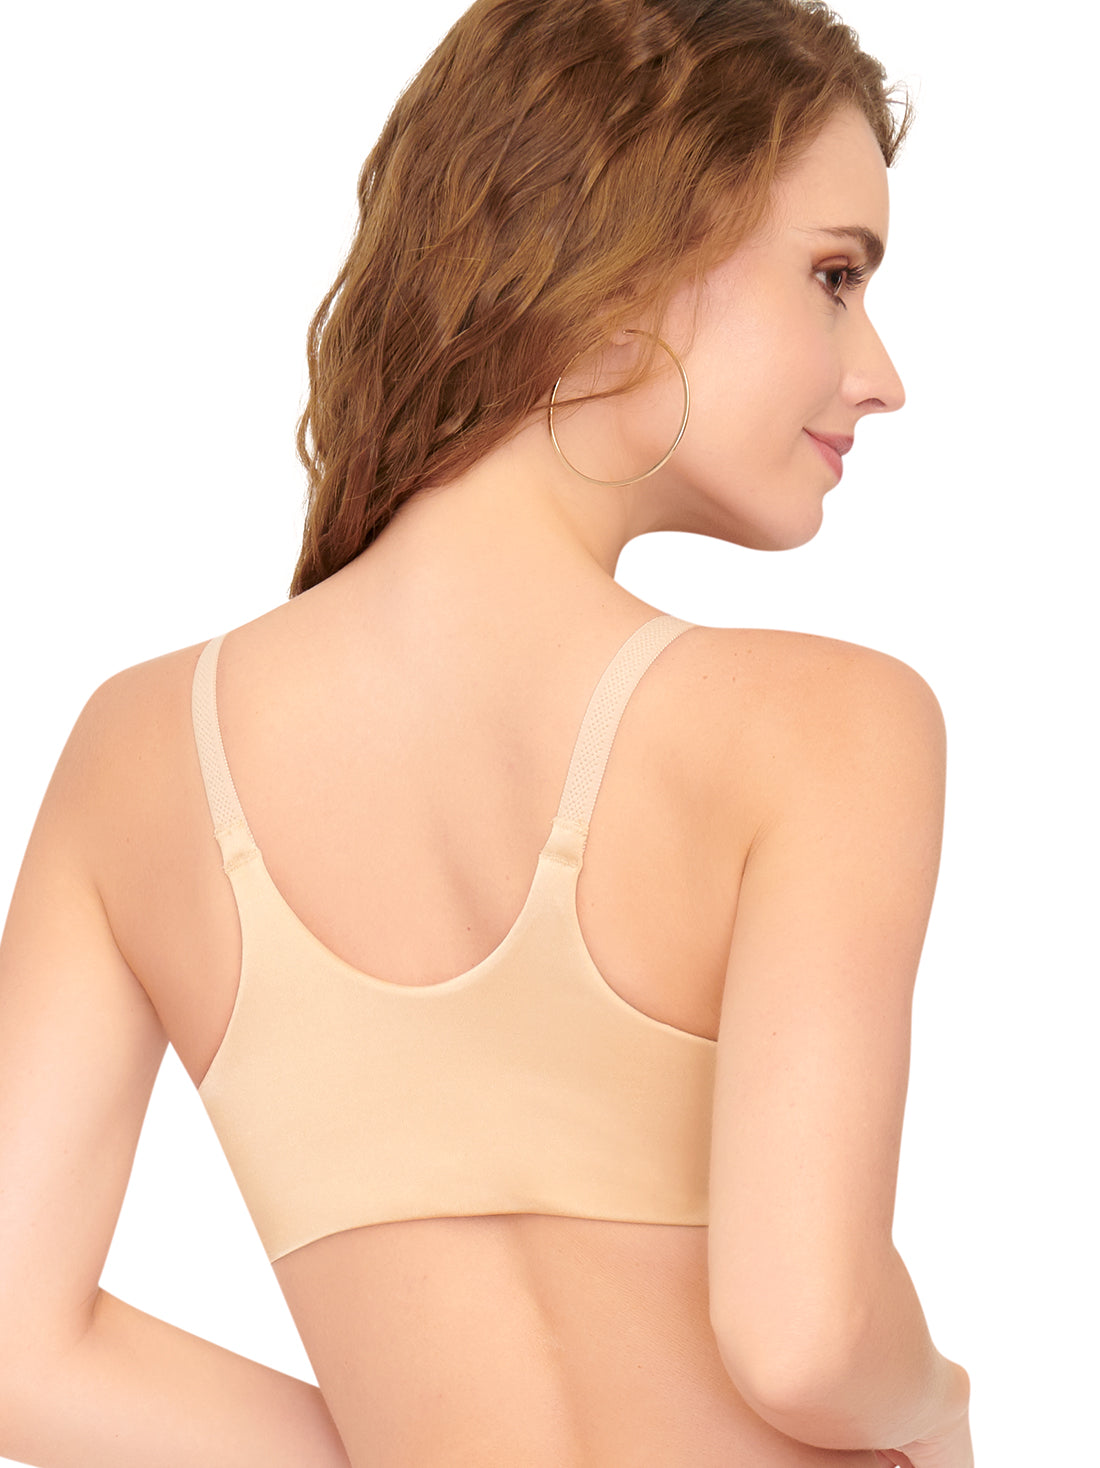 Ilusion 7472 - Womens Back Smoothing Everyday Front Closure Bra 